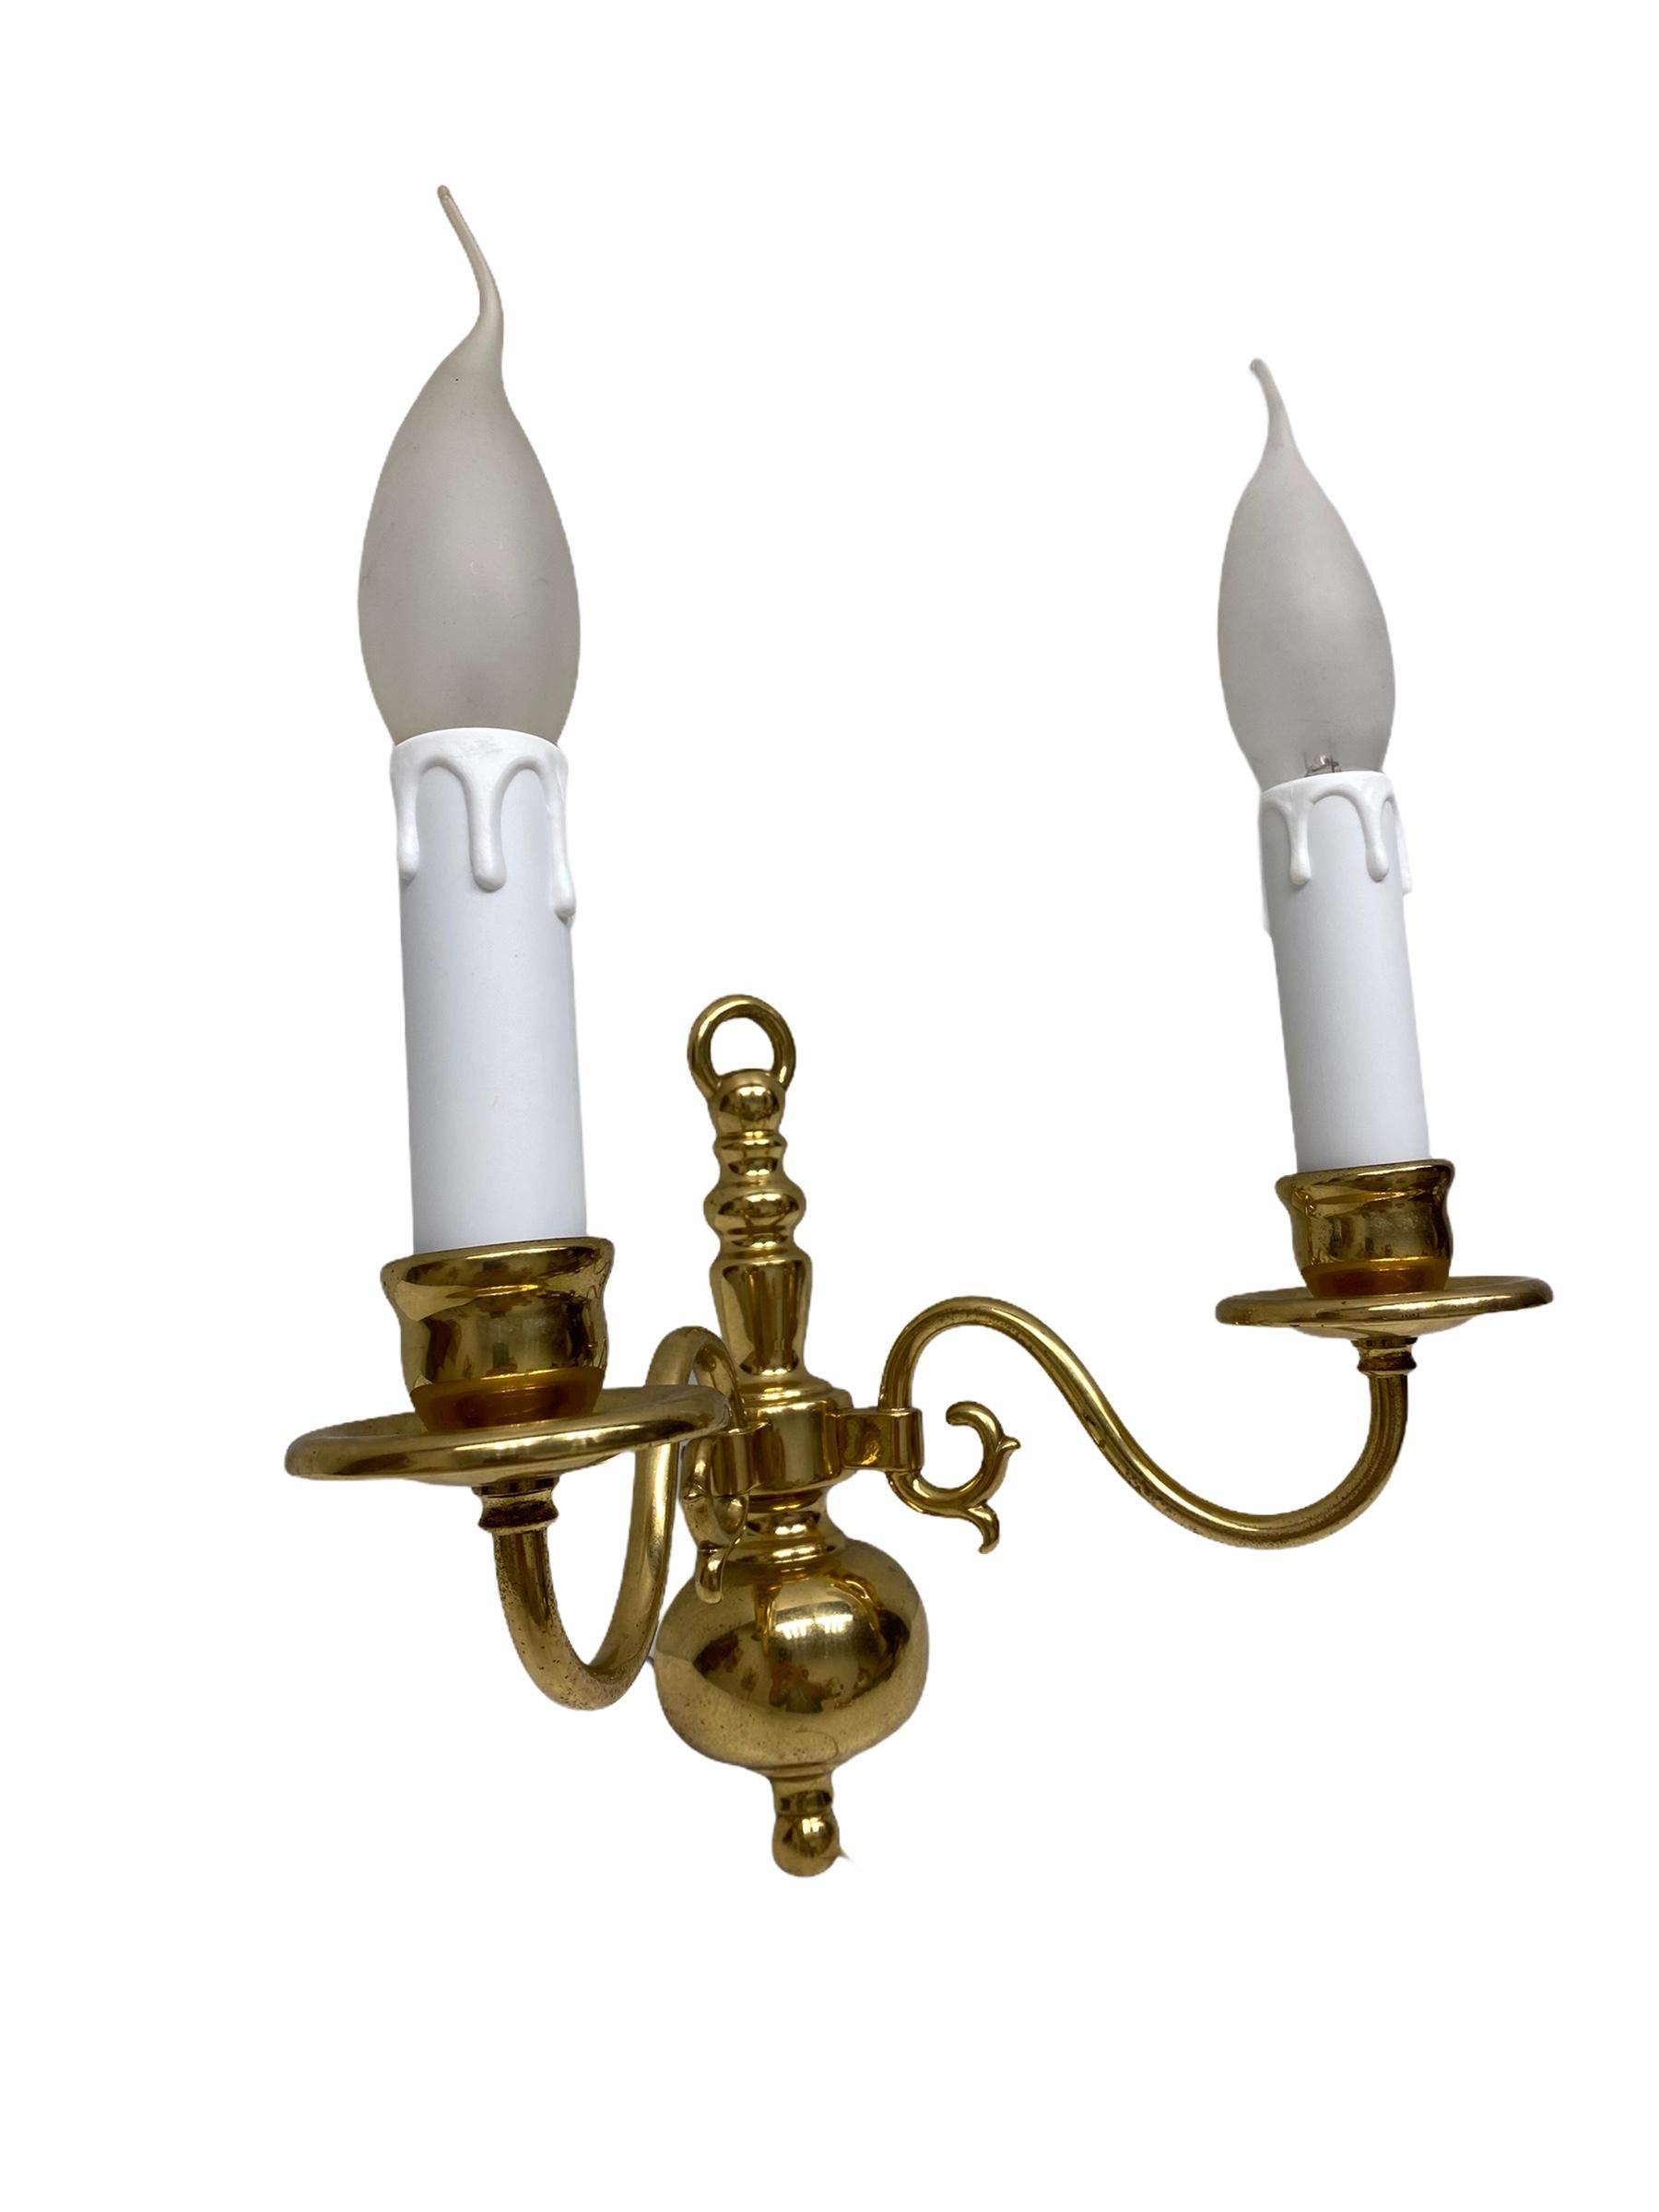 Pair of Solid Brass Two-Light Wall Sconces, Vintage, German, 1960s In Good Condition For Sale In Nuernberg, DE